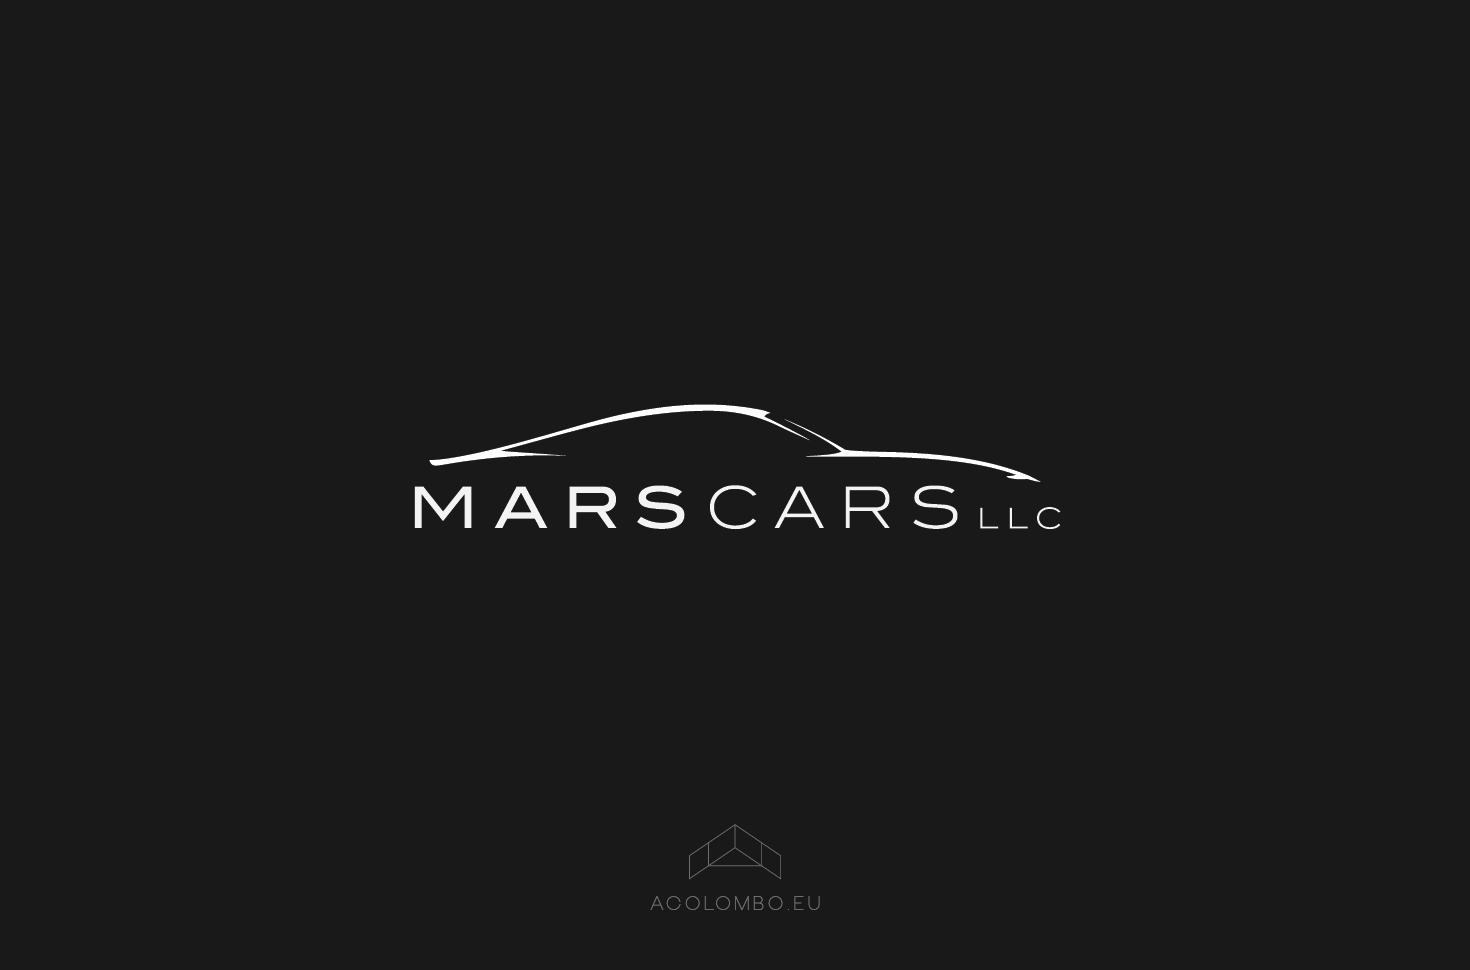 Auto Dealer Logo - Design #8 by acolombo | Exotic and Classic Car Dealer Logo Design ...